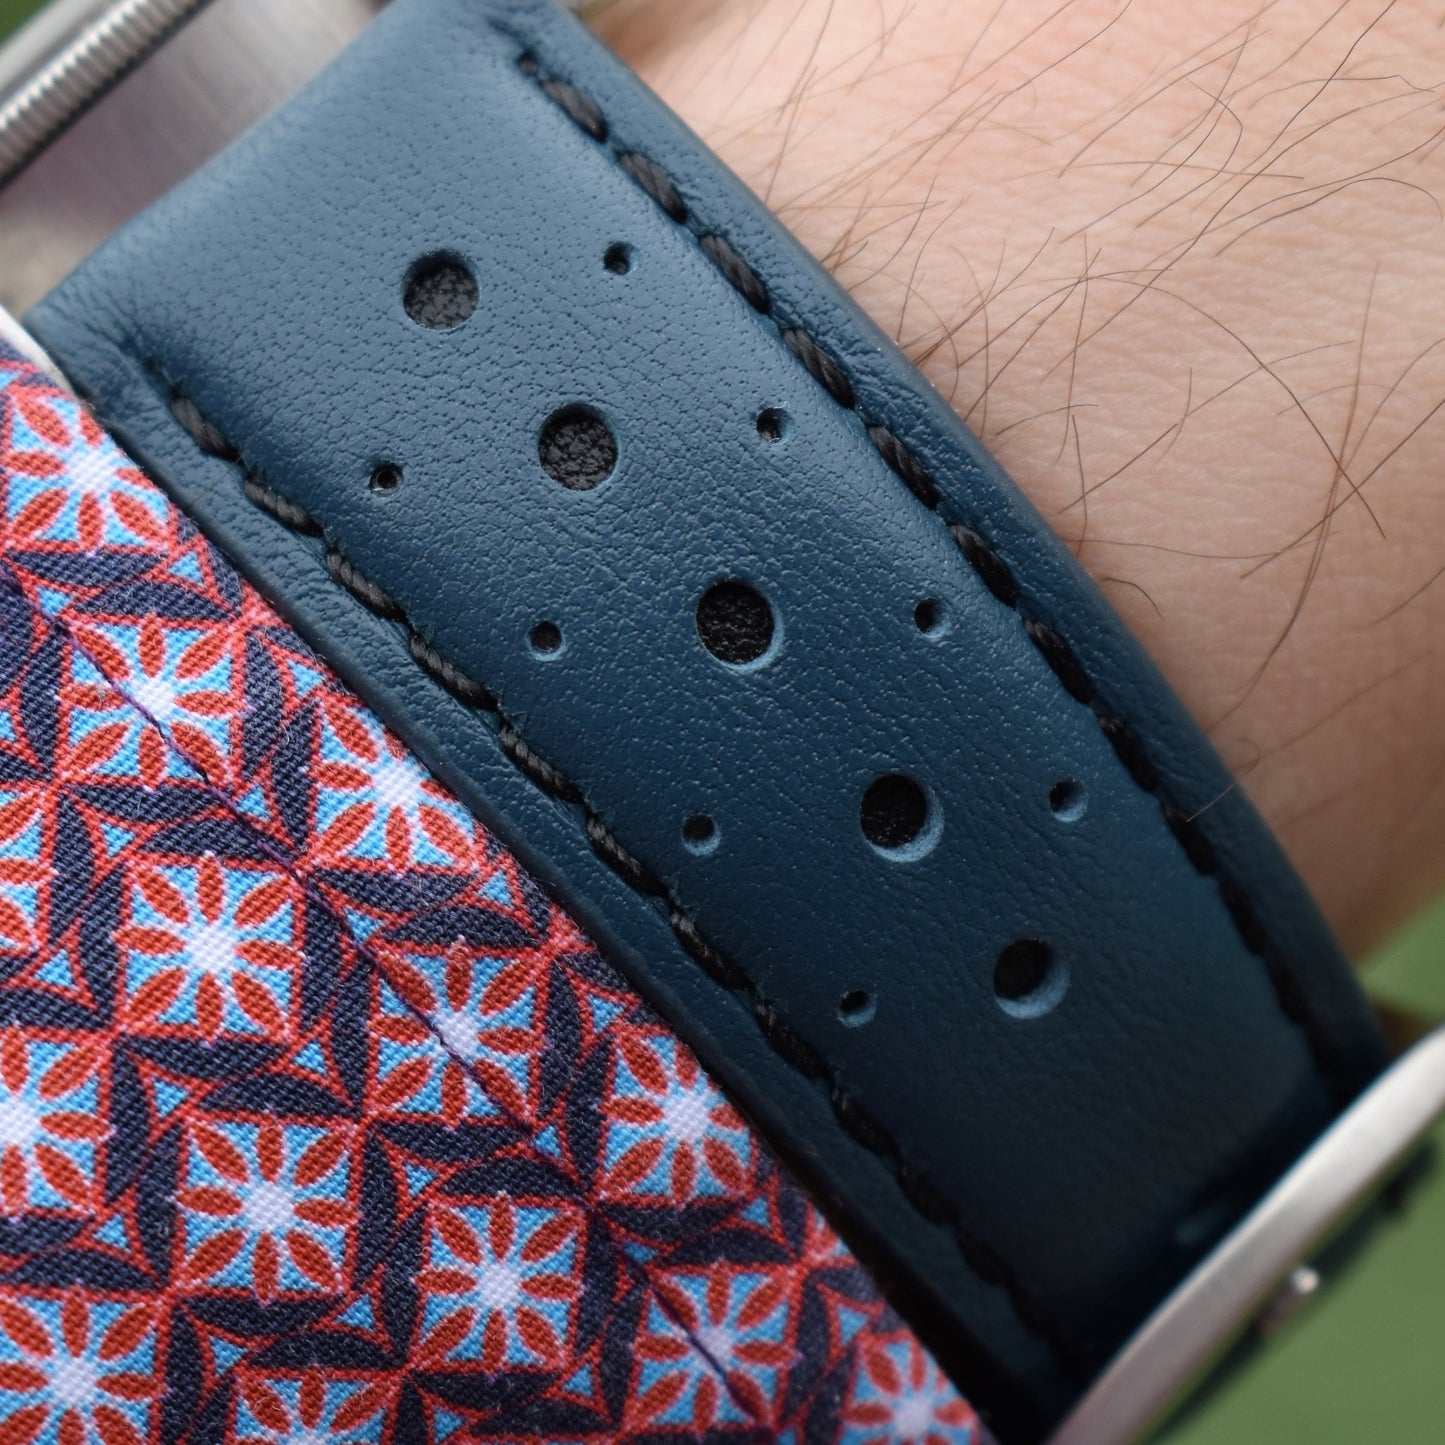 Wrist shot of the Le Mans dark petrol blue and black full grain leather racing watch strap. Placed on a males wrist.